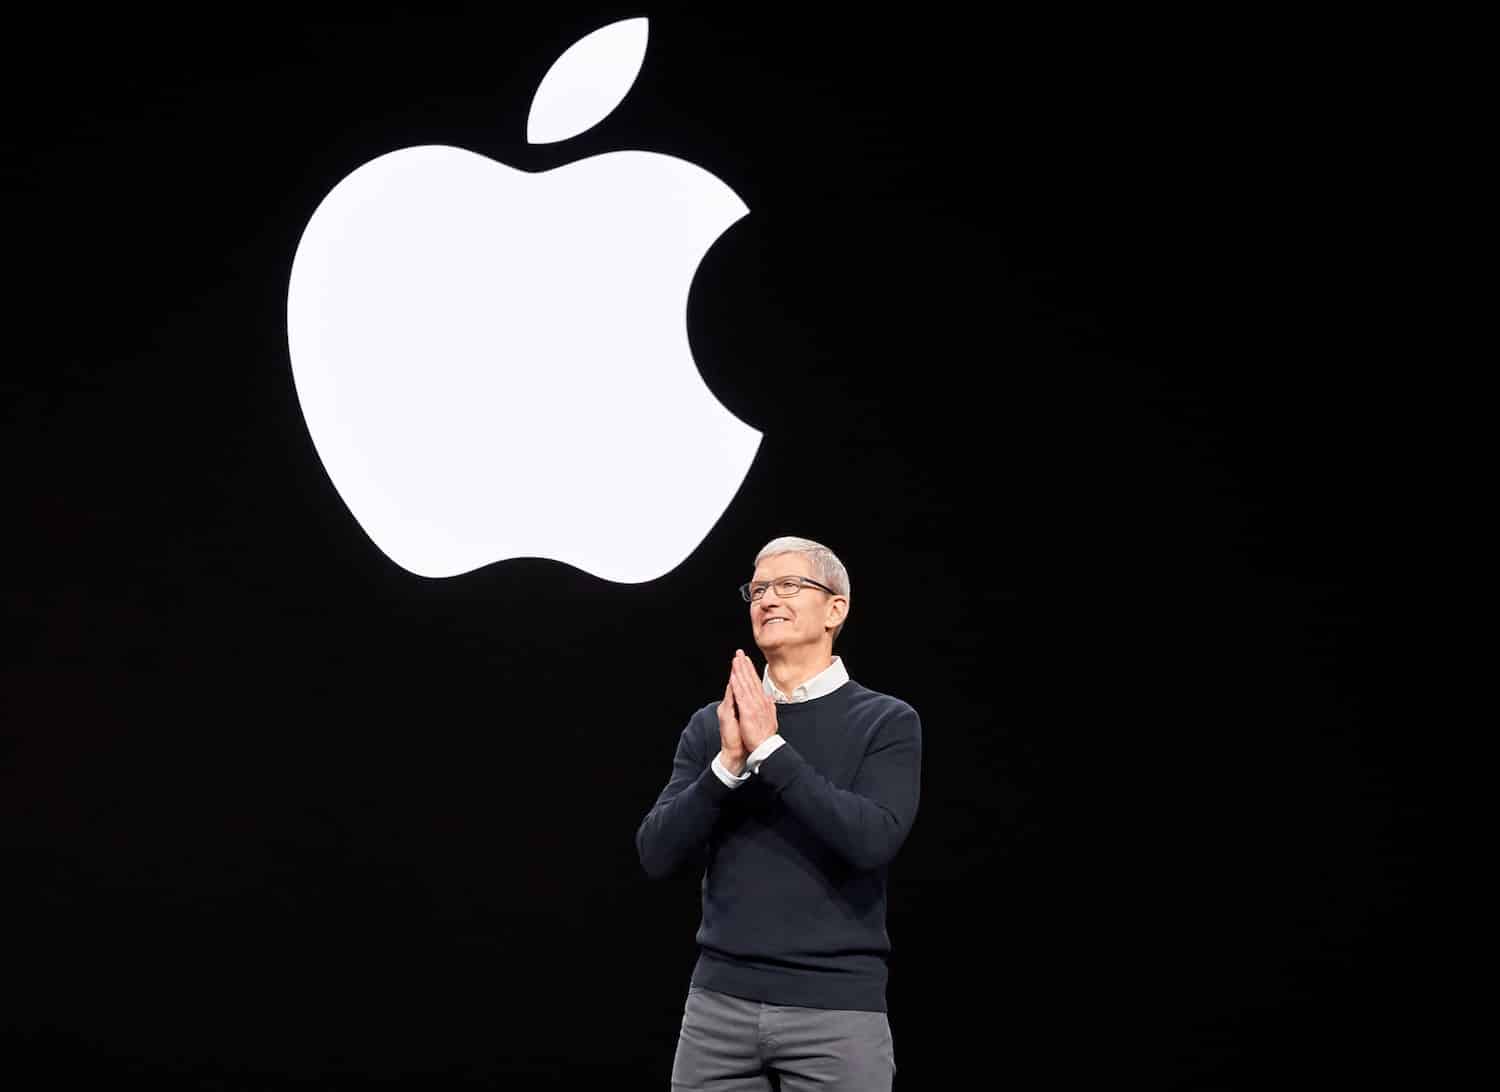 3 Key Takeaways From the Apple Event 2019